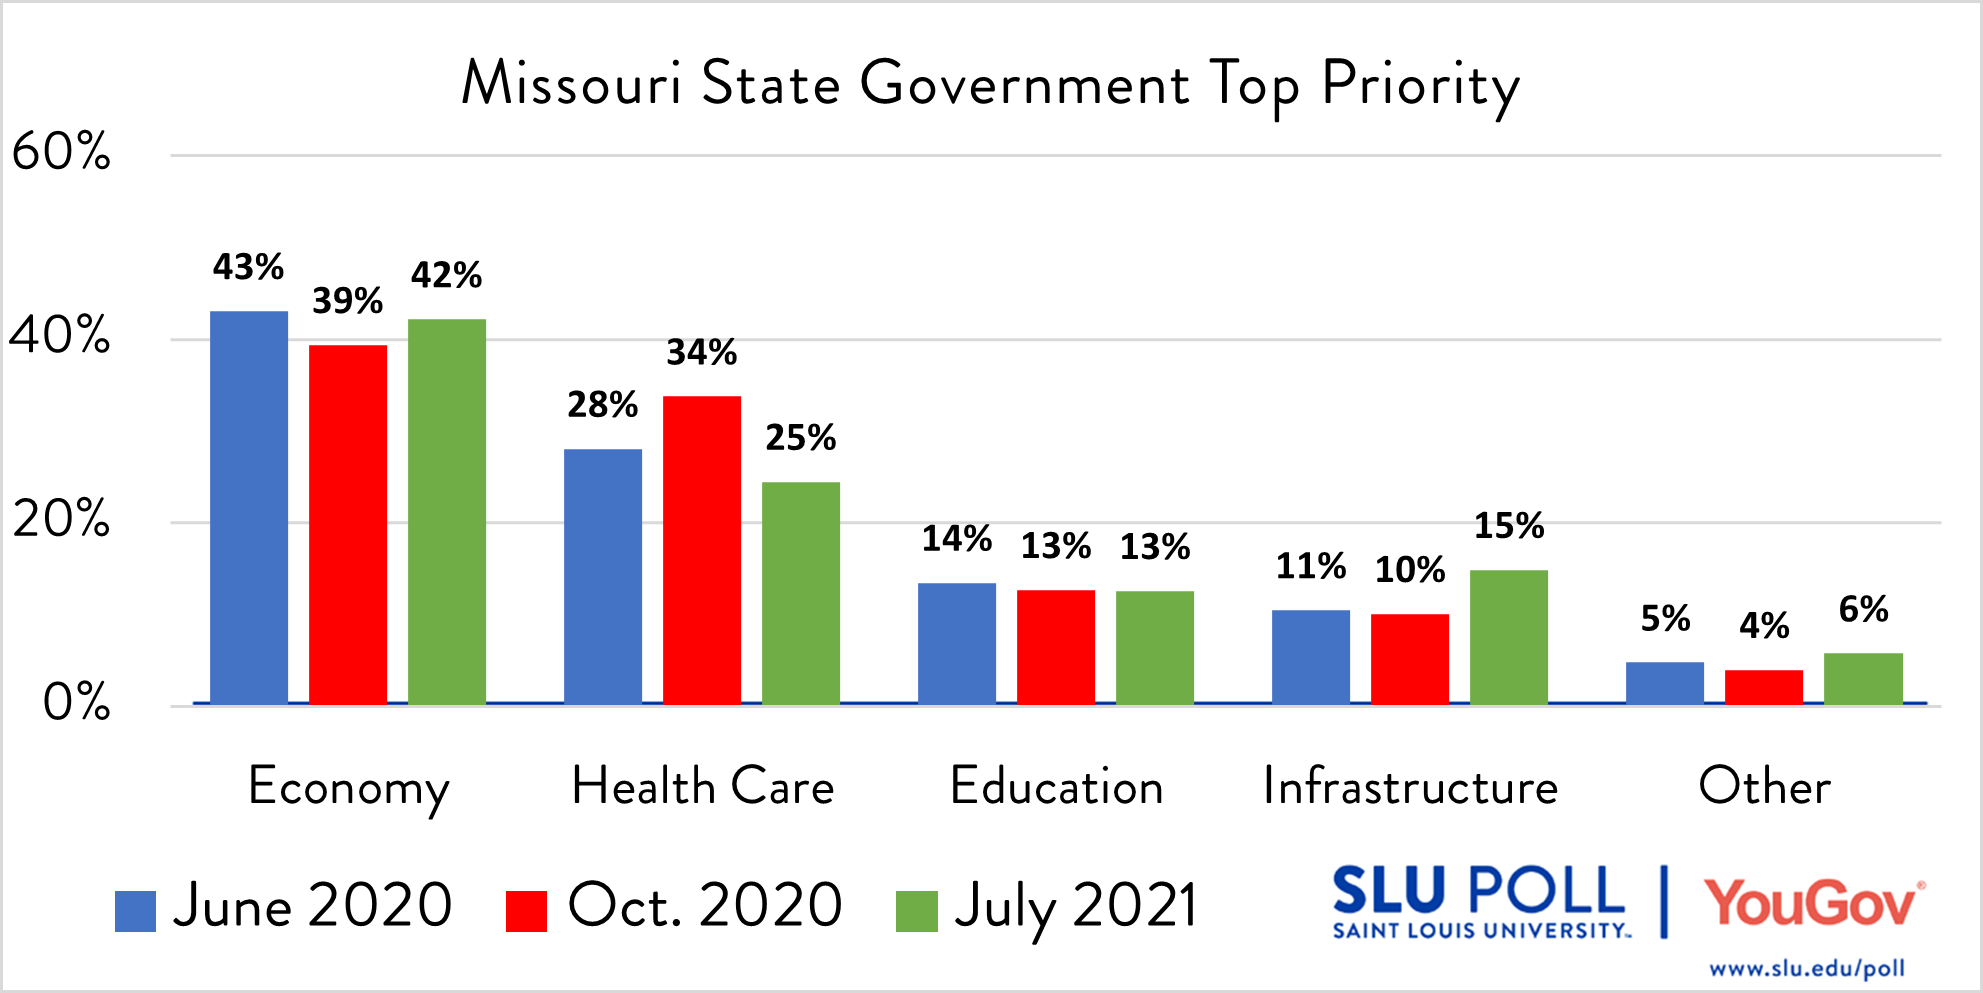 Which of the following do you think should be the TOP priority of the Missouri state government? - Economy: 42% - Health care: 25% - Education: 13% - Infrastructure: 15% - Other: 6%